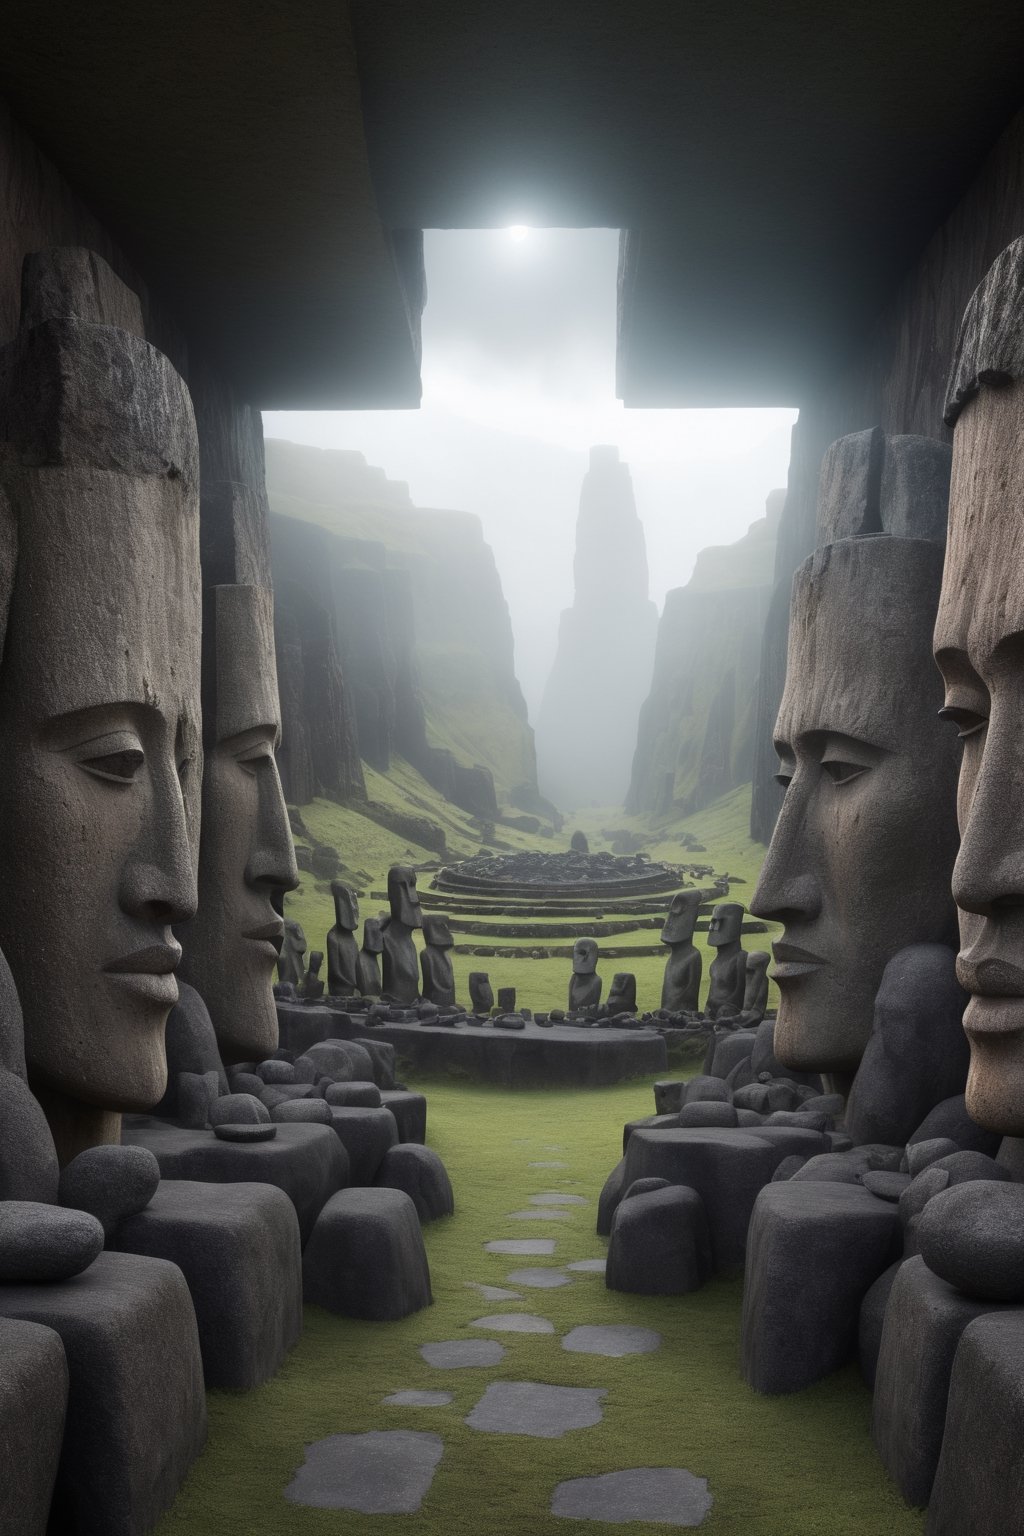 (Ancient megalithic civilization, Azka Lines, on Easter Island:1.5), (The colonial city of the future, in the mist-filled Grand Canyon, on an unknown Earth-like planet, 2 moon on sky, Spaceship flight connects colonies, waterfulls:1.3), (Machu Picchu, a mountain settlement, incredibly spectacular:1.2), (Mario Botta:1.3), (avant-garde, future, reality, science fiction, photorealistic), (modern architecture:1.2), White limestone with black granite, fountain, waterfall, landmark, square, path, narrow street,
(Large Files, Ultra Realistic, 8K, 16k, FHD, HD, VFX, Perfect, Photography, composition, Architecture Sales Photography, Architecture Competition, Ultra High Resolution, Cinematography, High Resolution Image:1.1), (dramatic lighting, direct sunlight, ray tracing, clear shadow:1.2),  (real landscape:1.1), (blurred background:1.0), (urban background, more_details) ,
mayamaze,extrusionbuilding,caveruinsPOV,caveruinsAerial